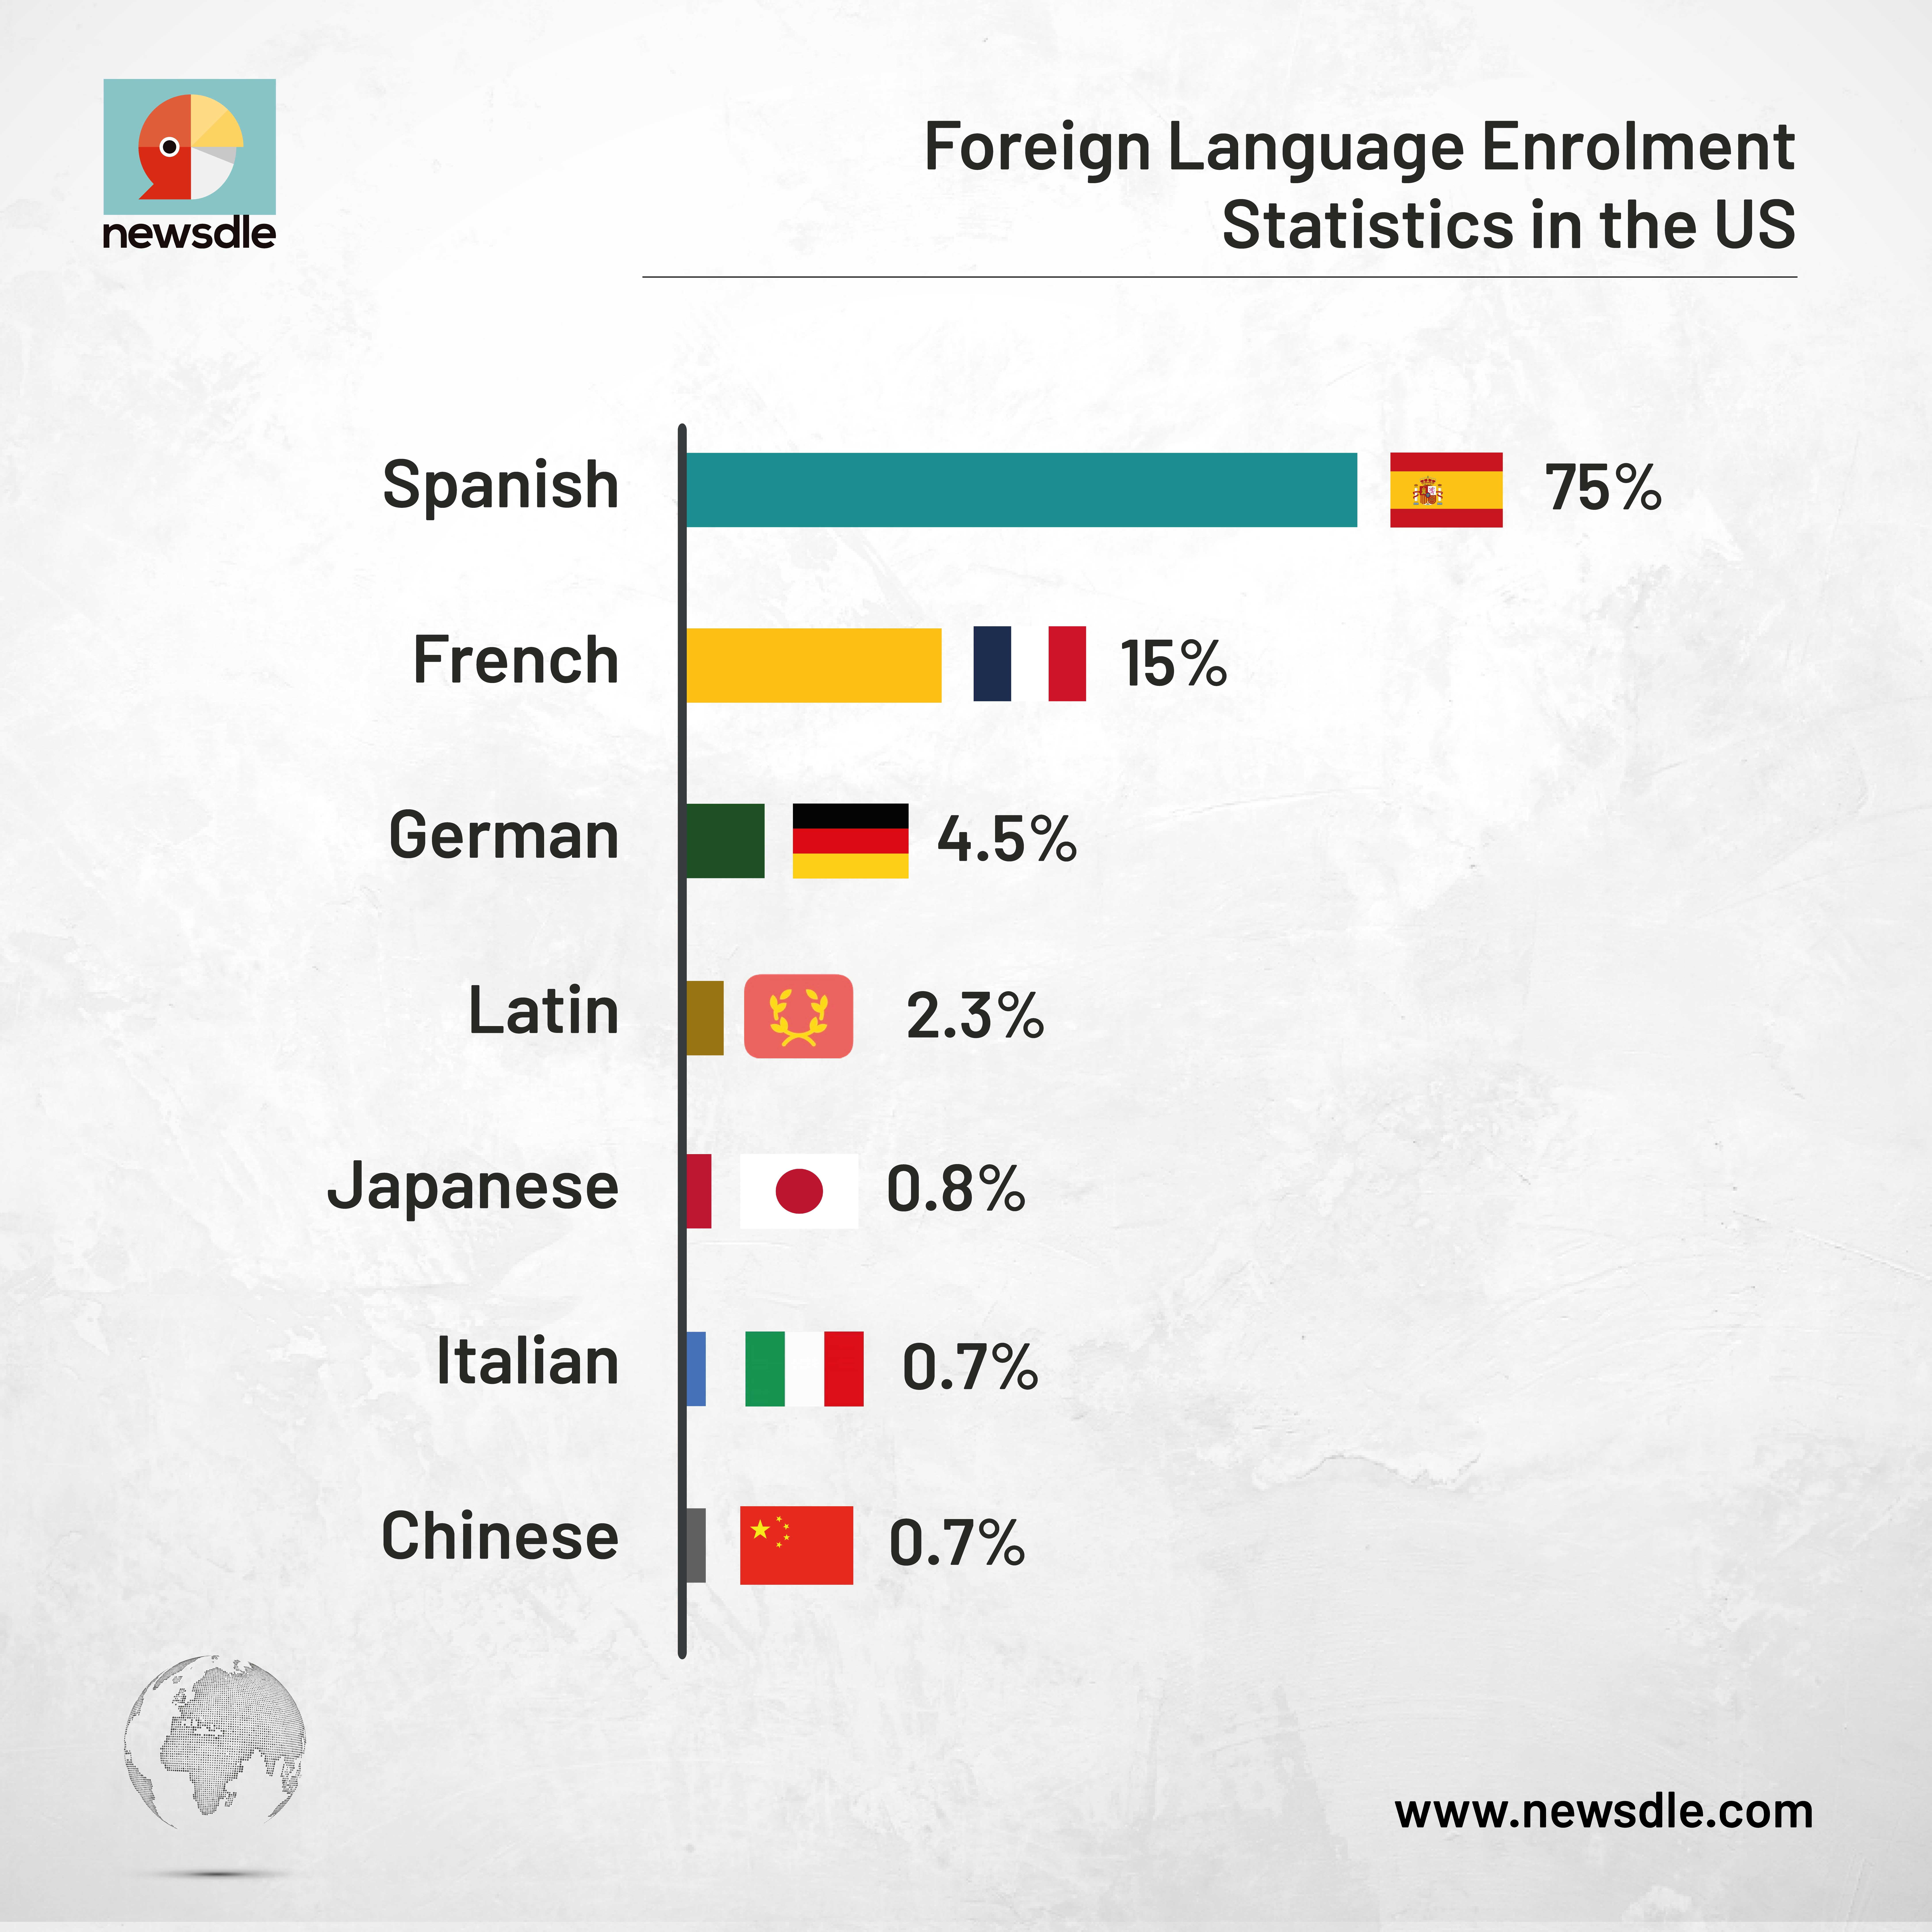 foreign language enrolment in the US chart